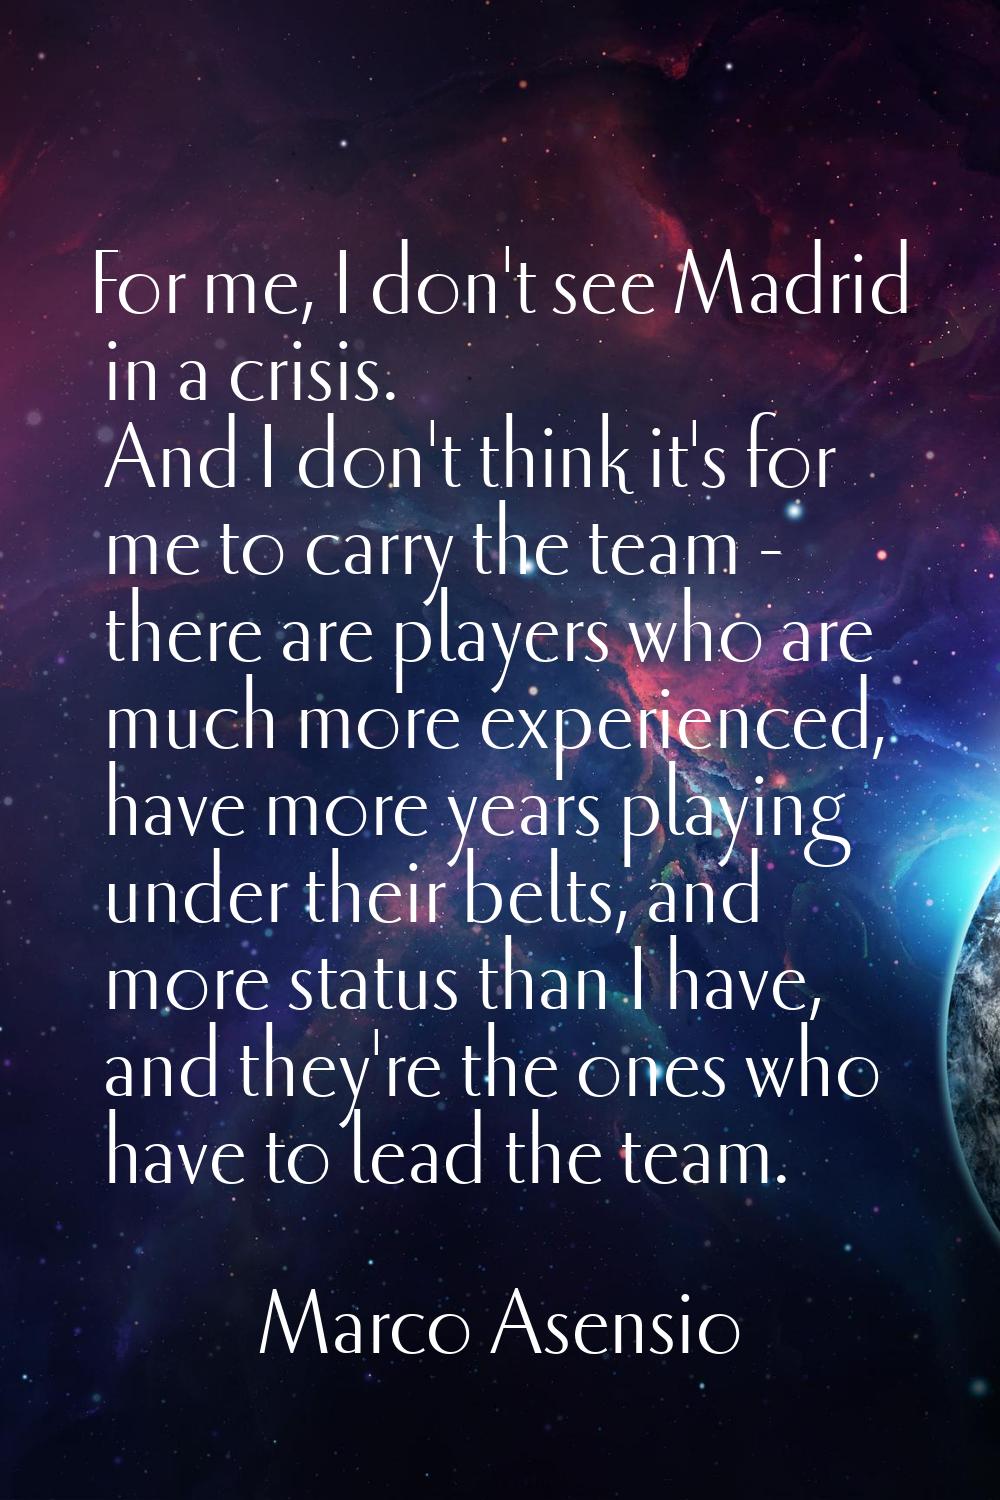 For me, I don't see Madrid in a crisis. And I don't think it's for me to carry the team - there are